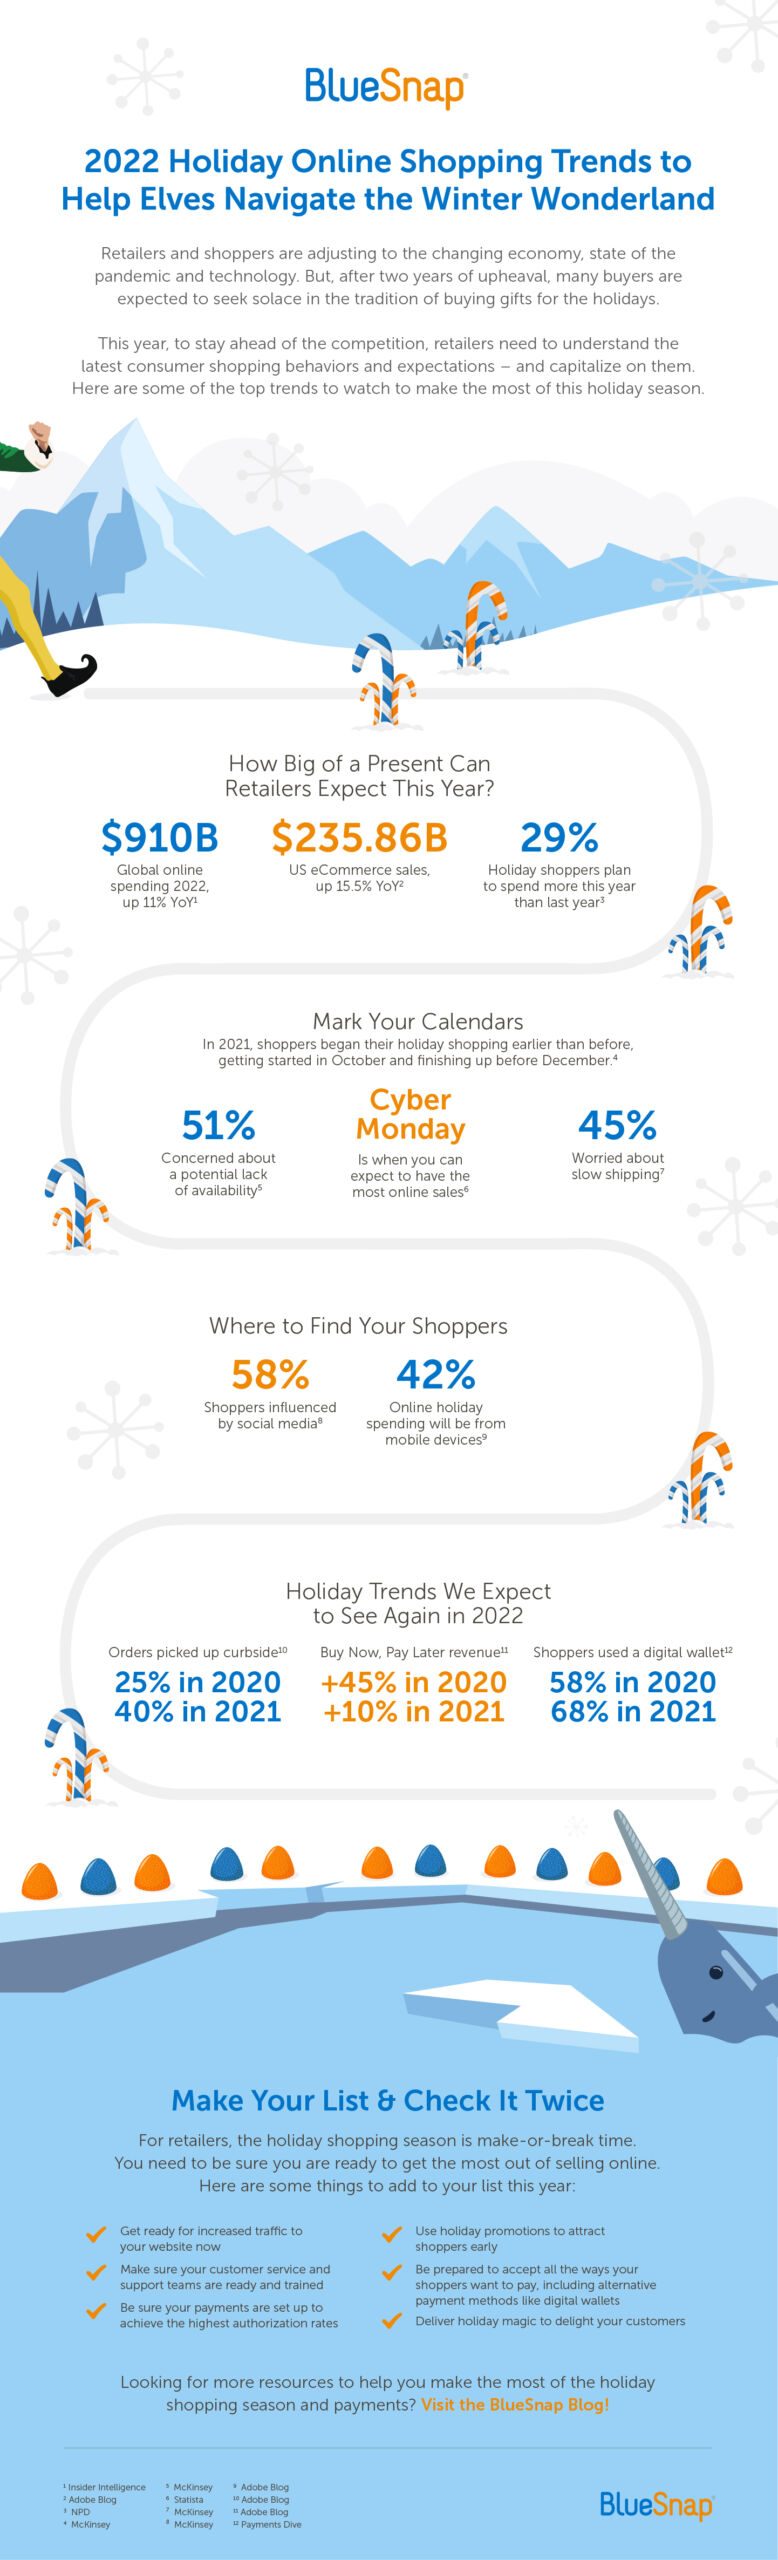 The stats and facts you need to make the most of holiday online retail sales.